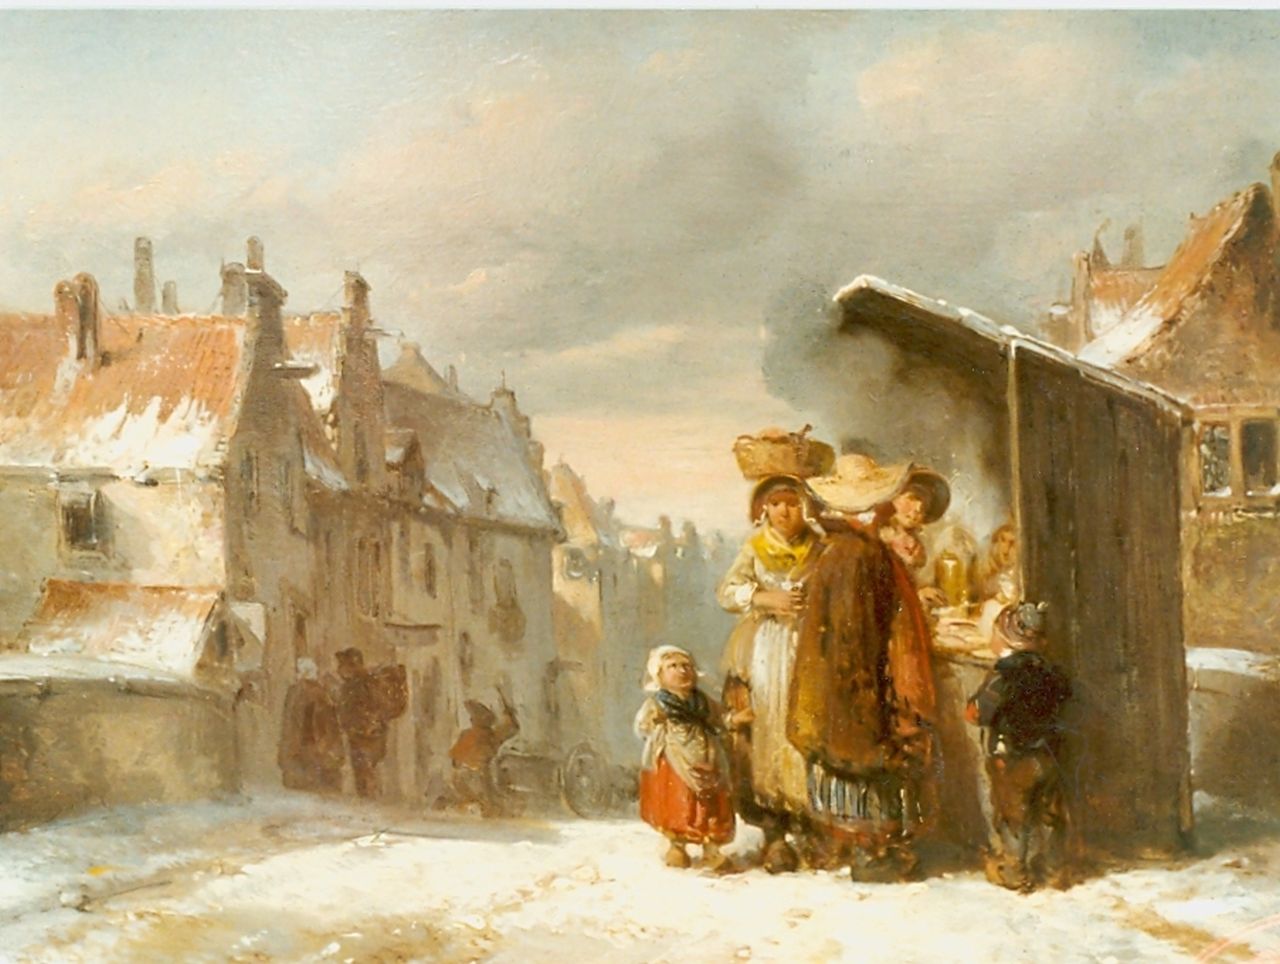 Kate H.F.C. ten | 'Herman' Frederik Carel ten Kate, Figures in a snow-covered town, oil on panel 19.5 x 26.3 cm, signed l.l.